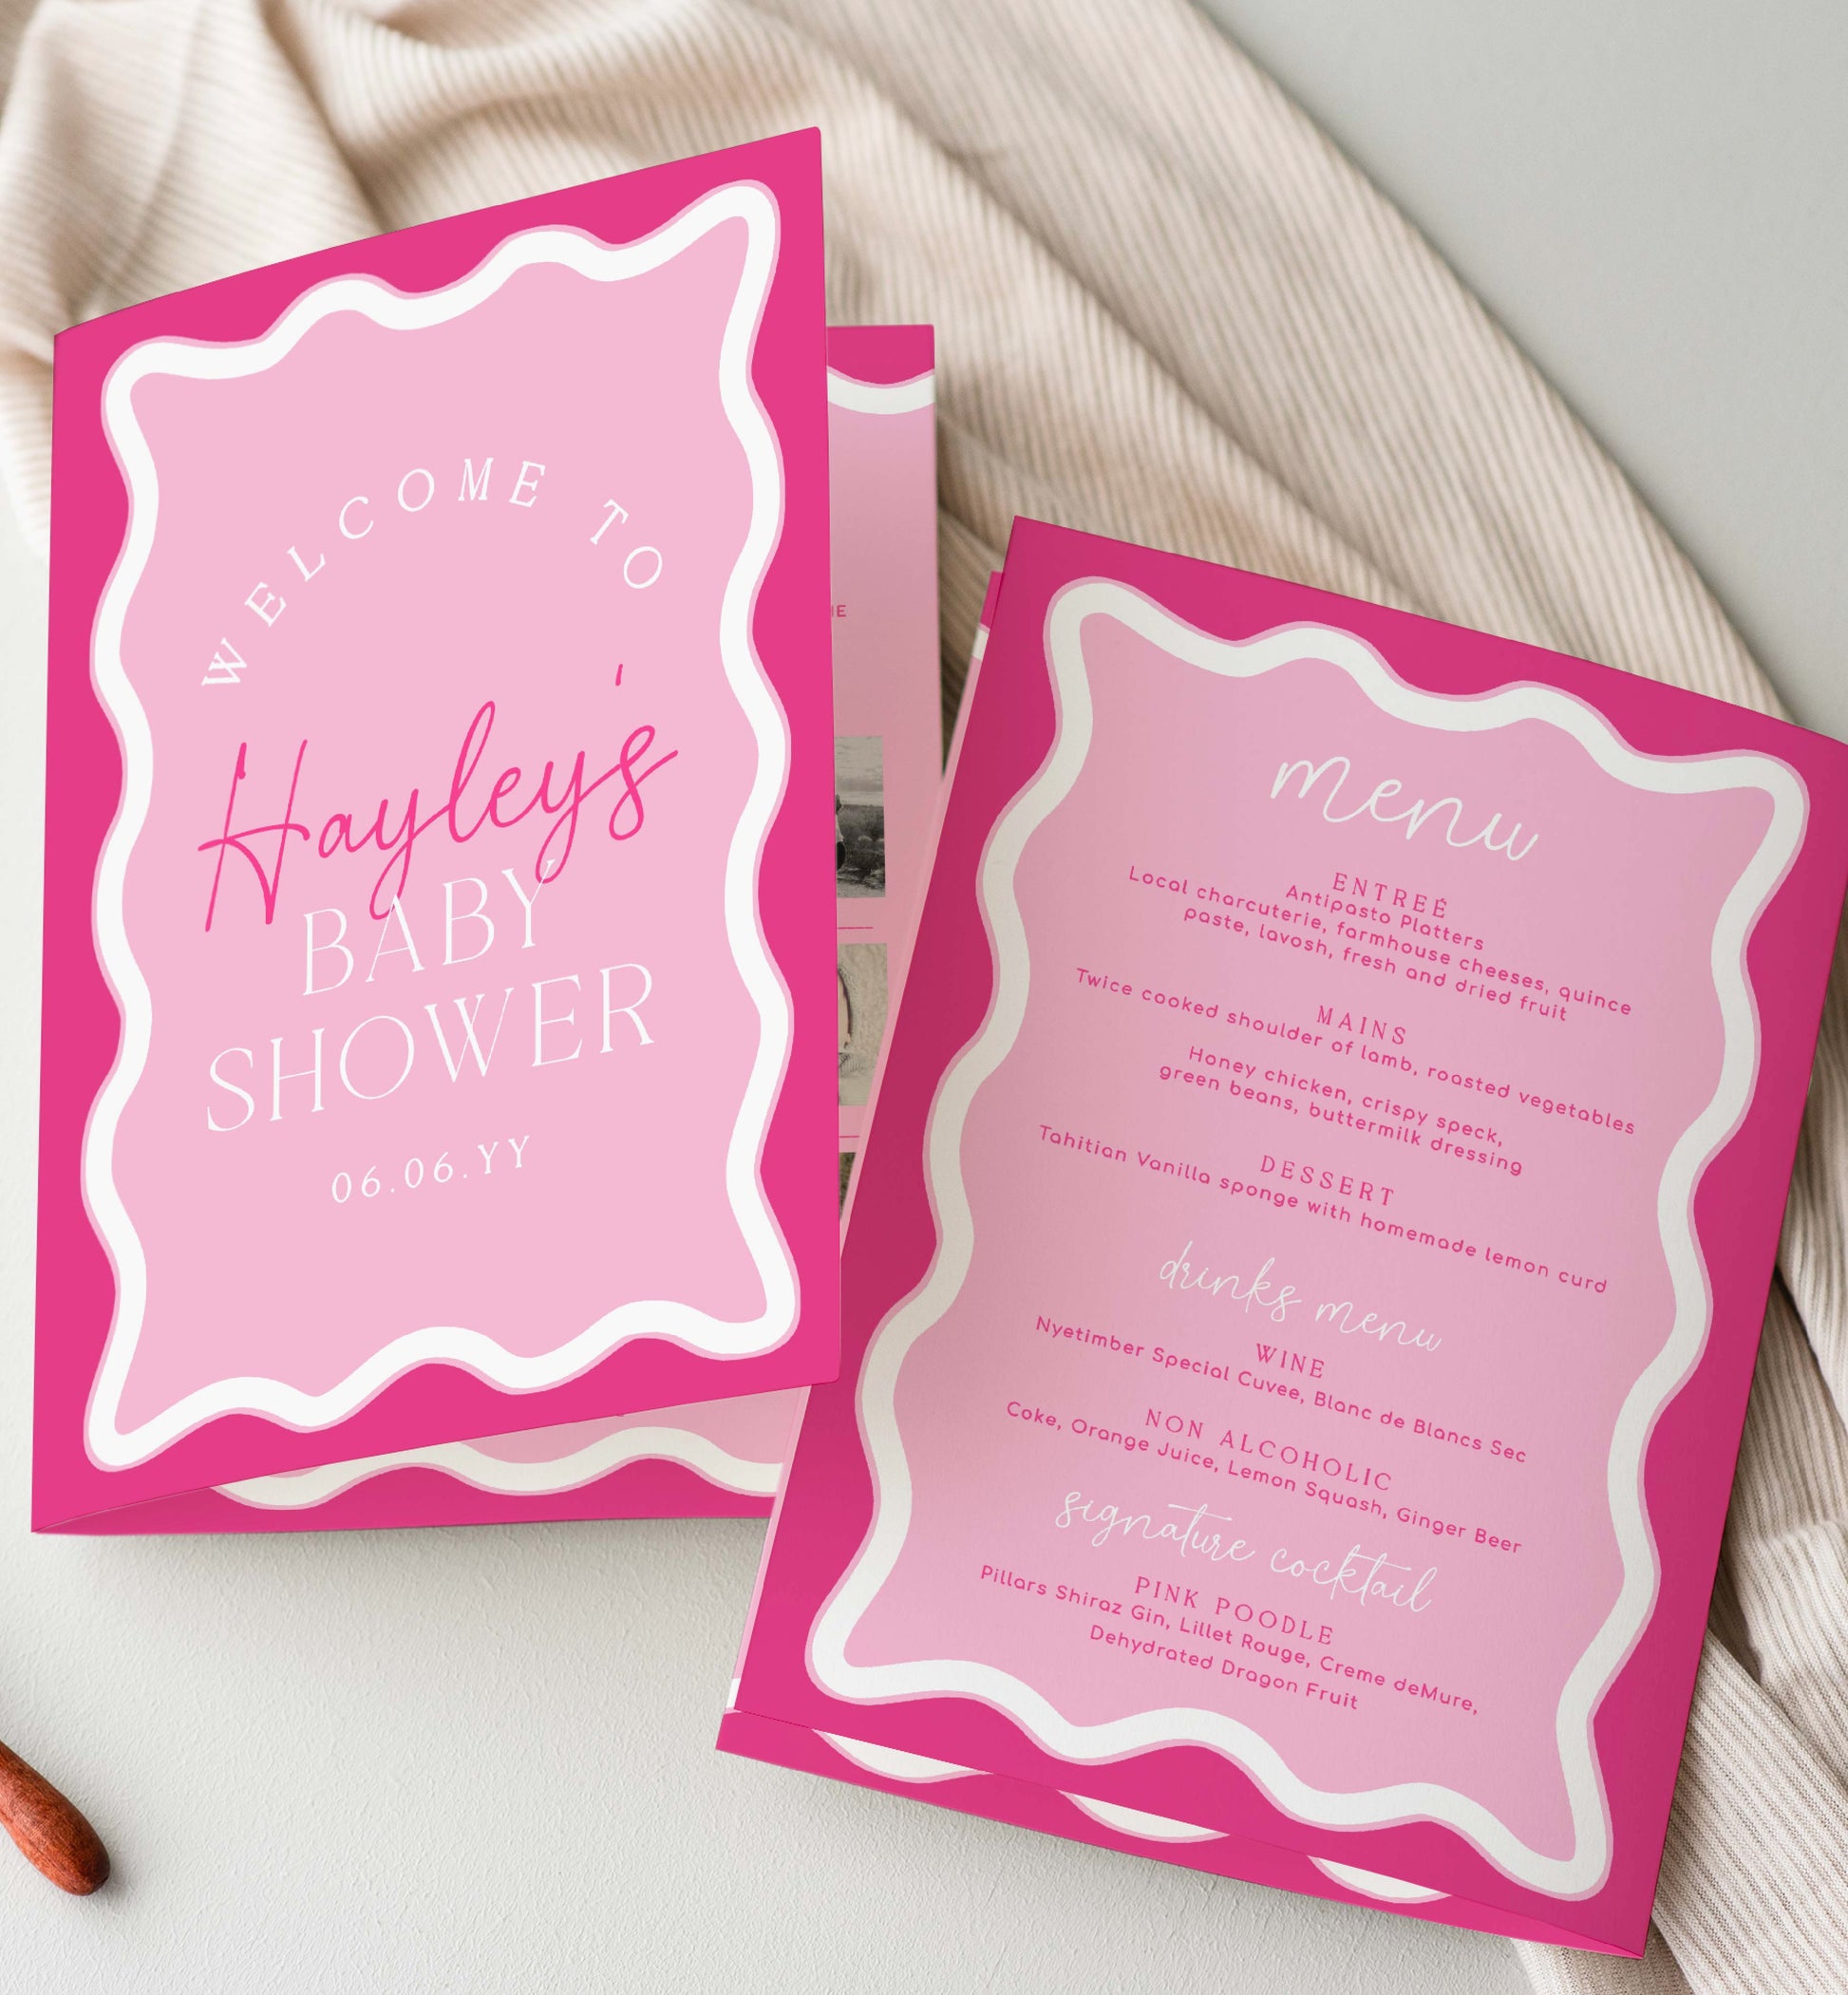 Hot Pink Wavy Baby Shower Menu and Games Booklet, Modern Wavy Line Baby Shower Game, Printable Menu Template, Girl Baby Shower Games, Wave